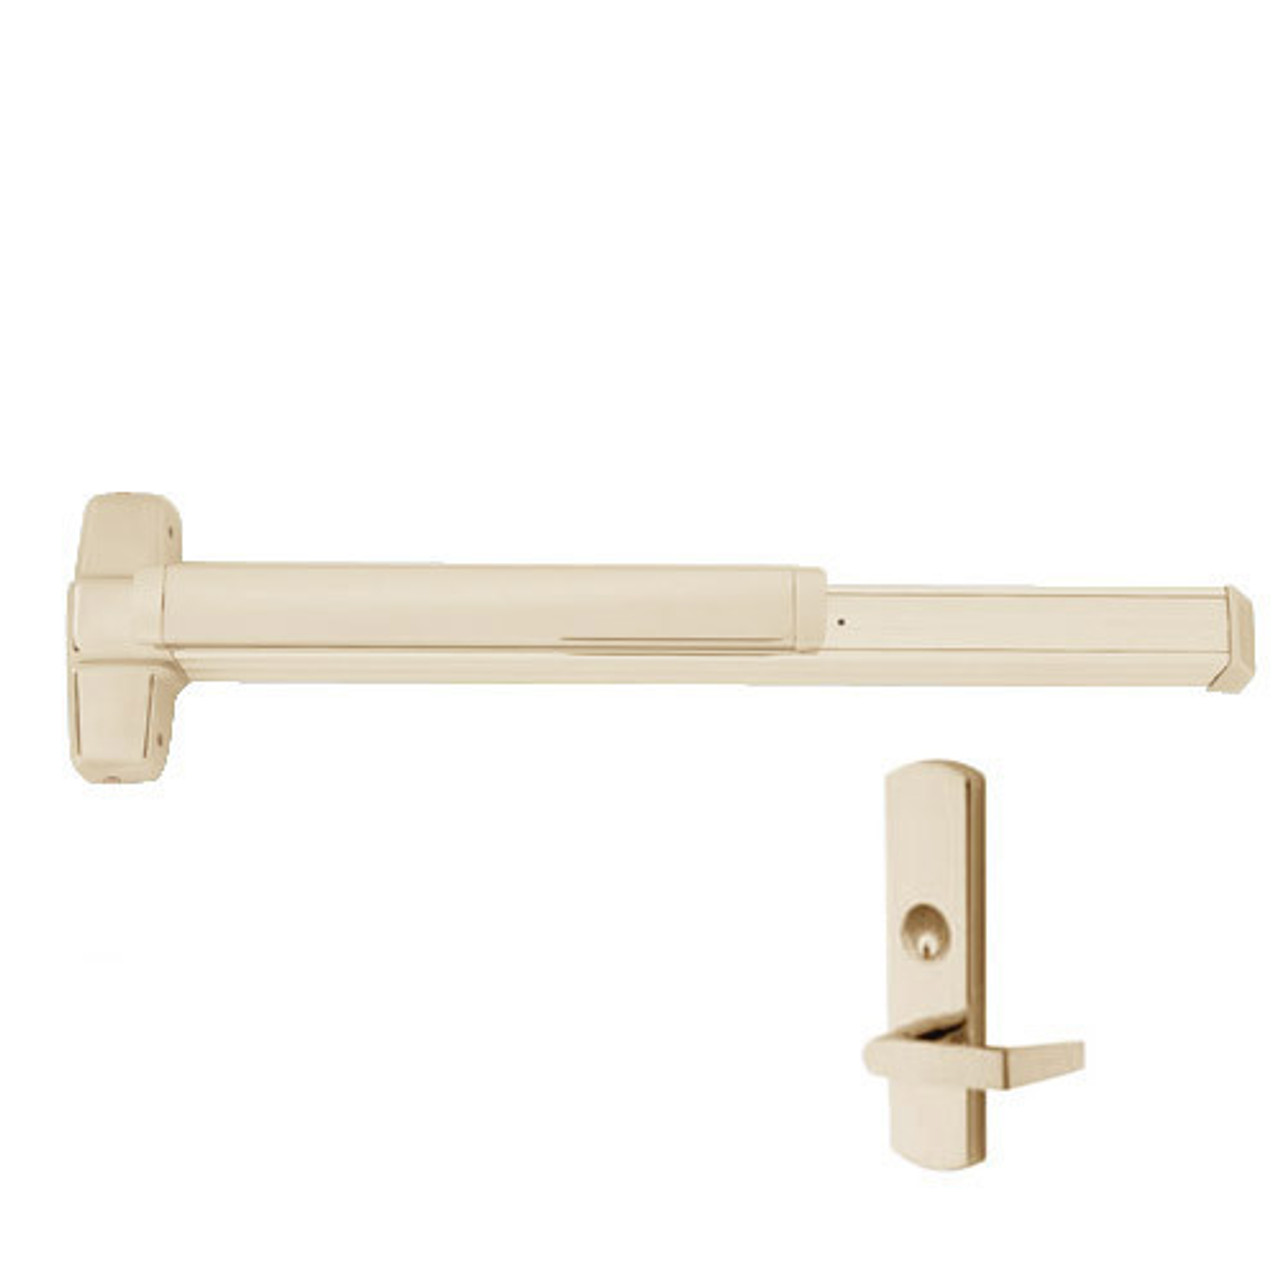 EL9847WDC-L-US4-3-LHR Von Duprin Exit Device with Electric Latch Retraction in Satin Brass